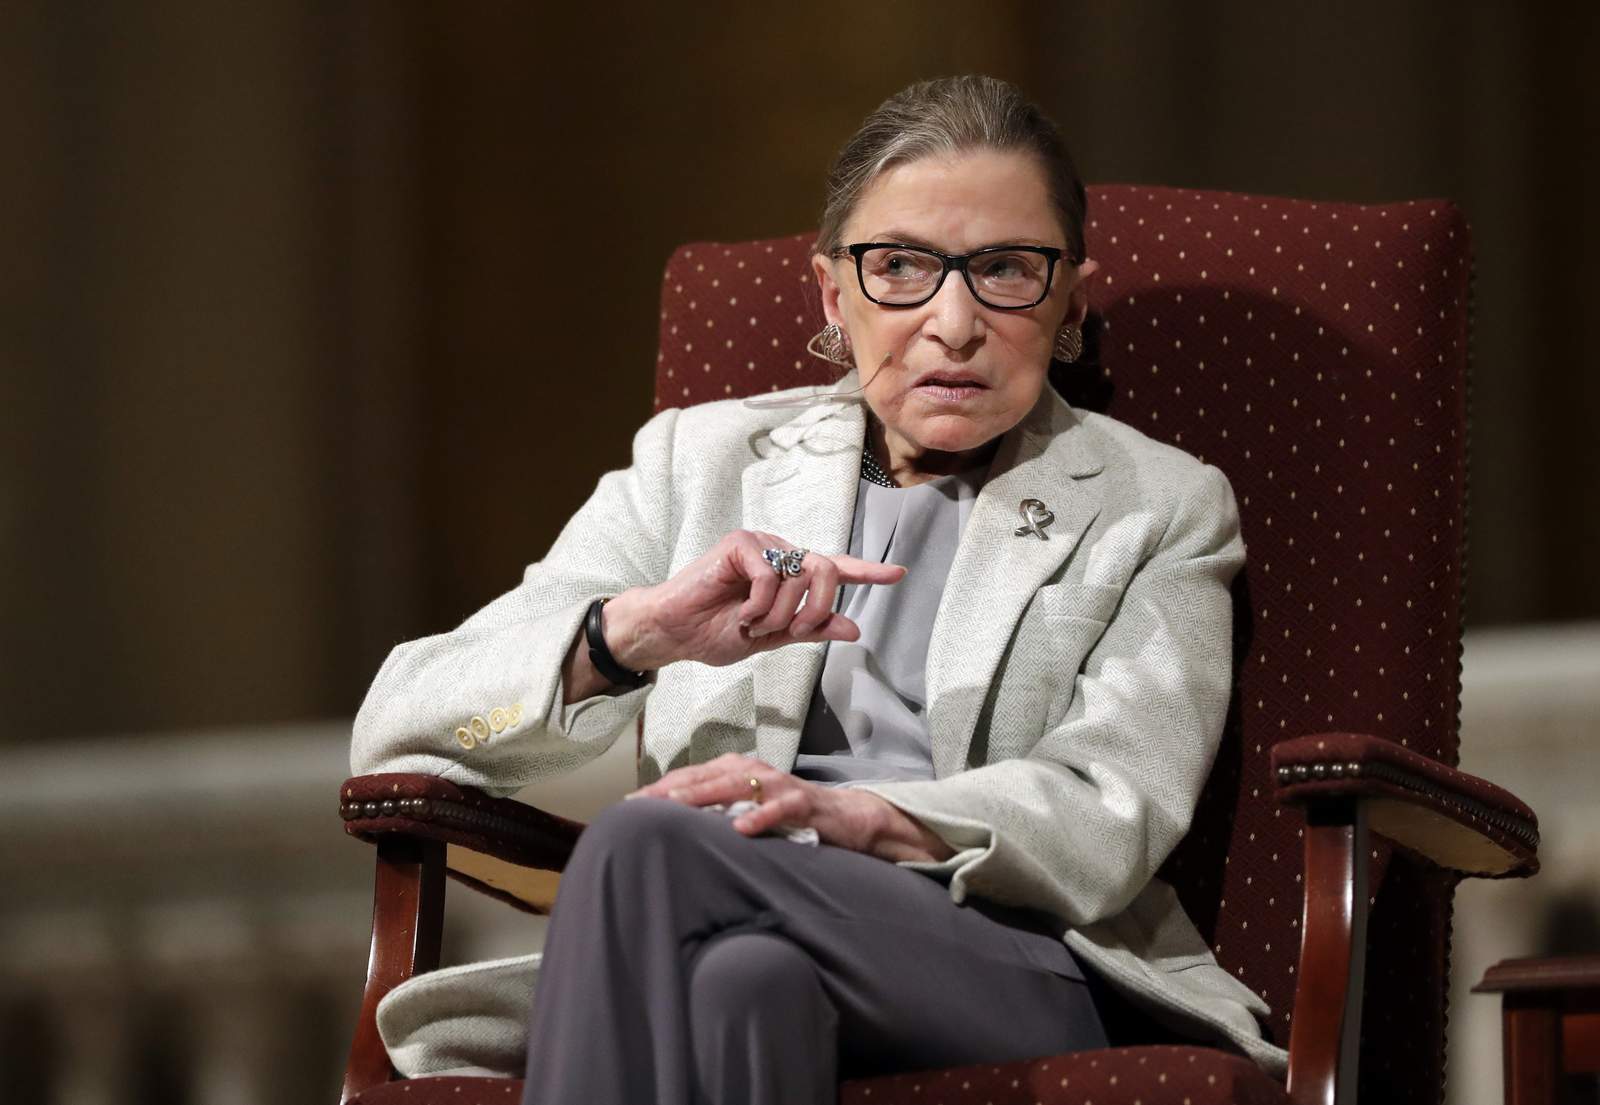 The Latest: Trump orders flags at half-staff for Ginsburg